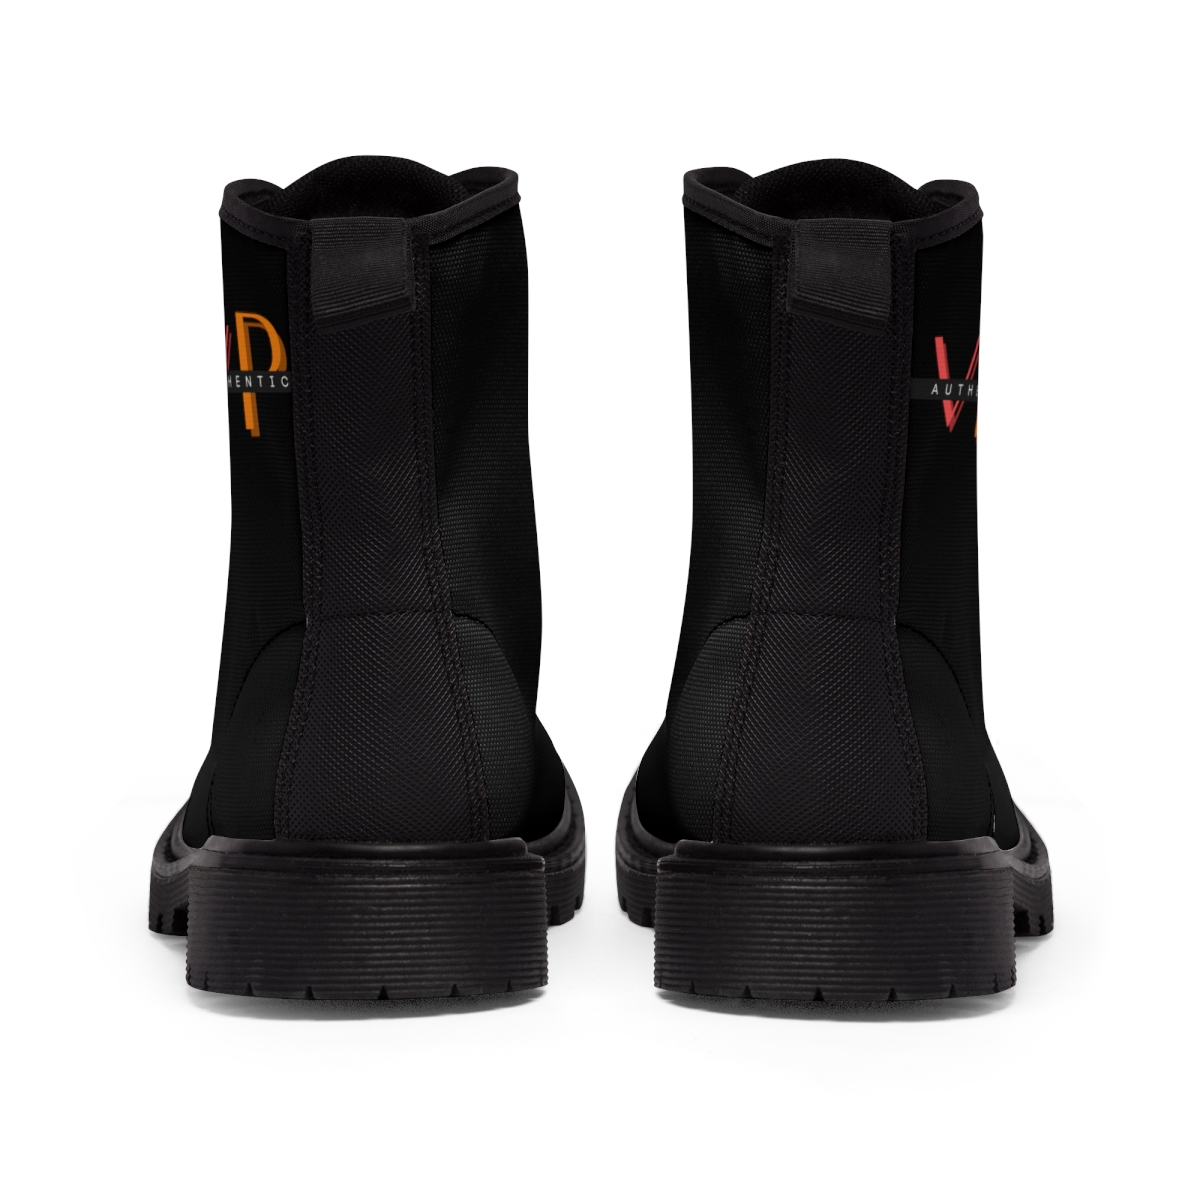 VP AUTHENTIC Brand- High End Fashion Boots product thumbnail image